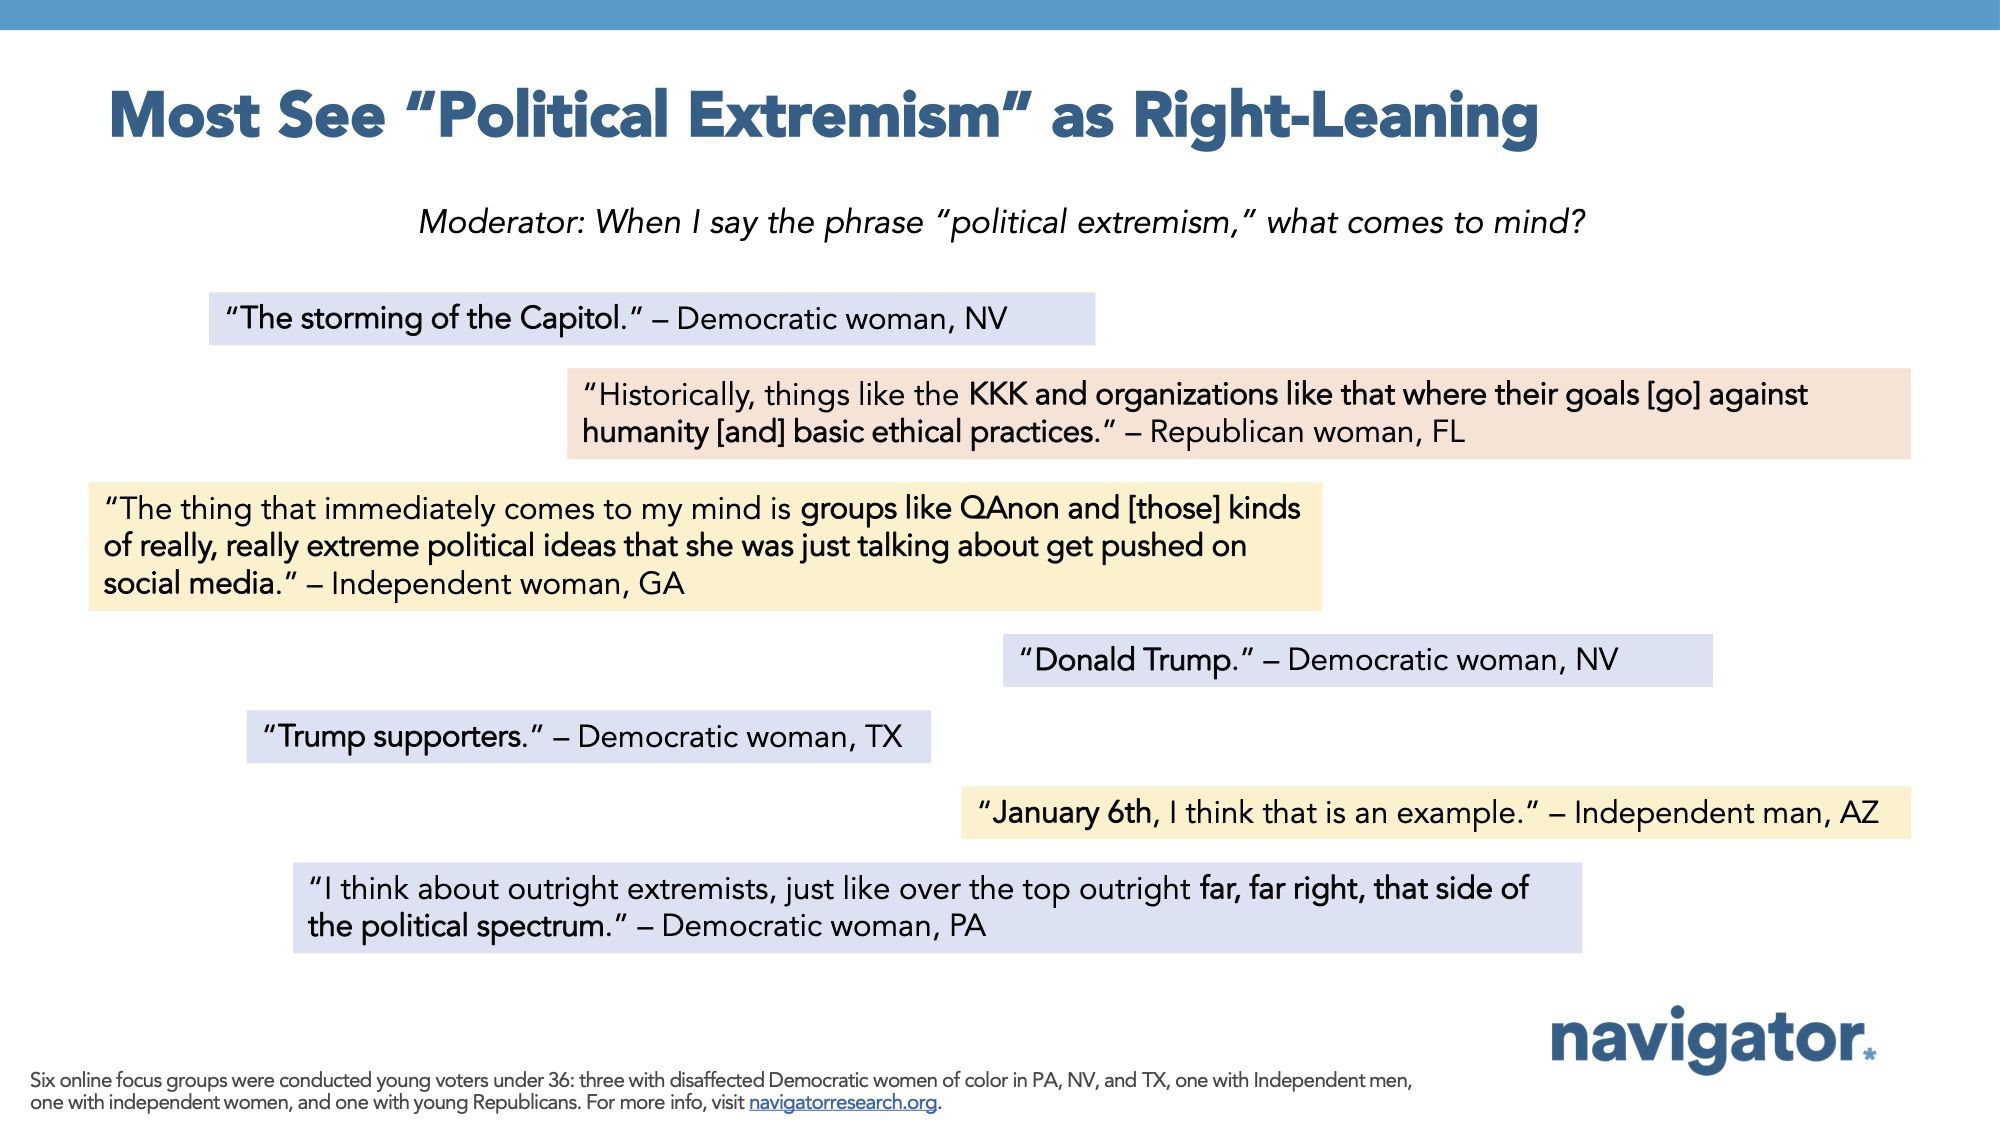 Focus group report slide titled: Most See “Political Extremism” as Right-Leaning